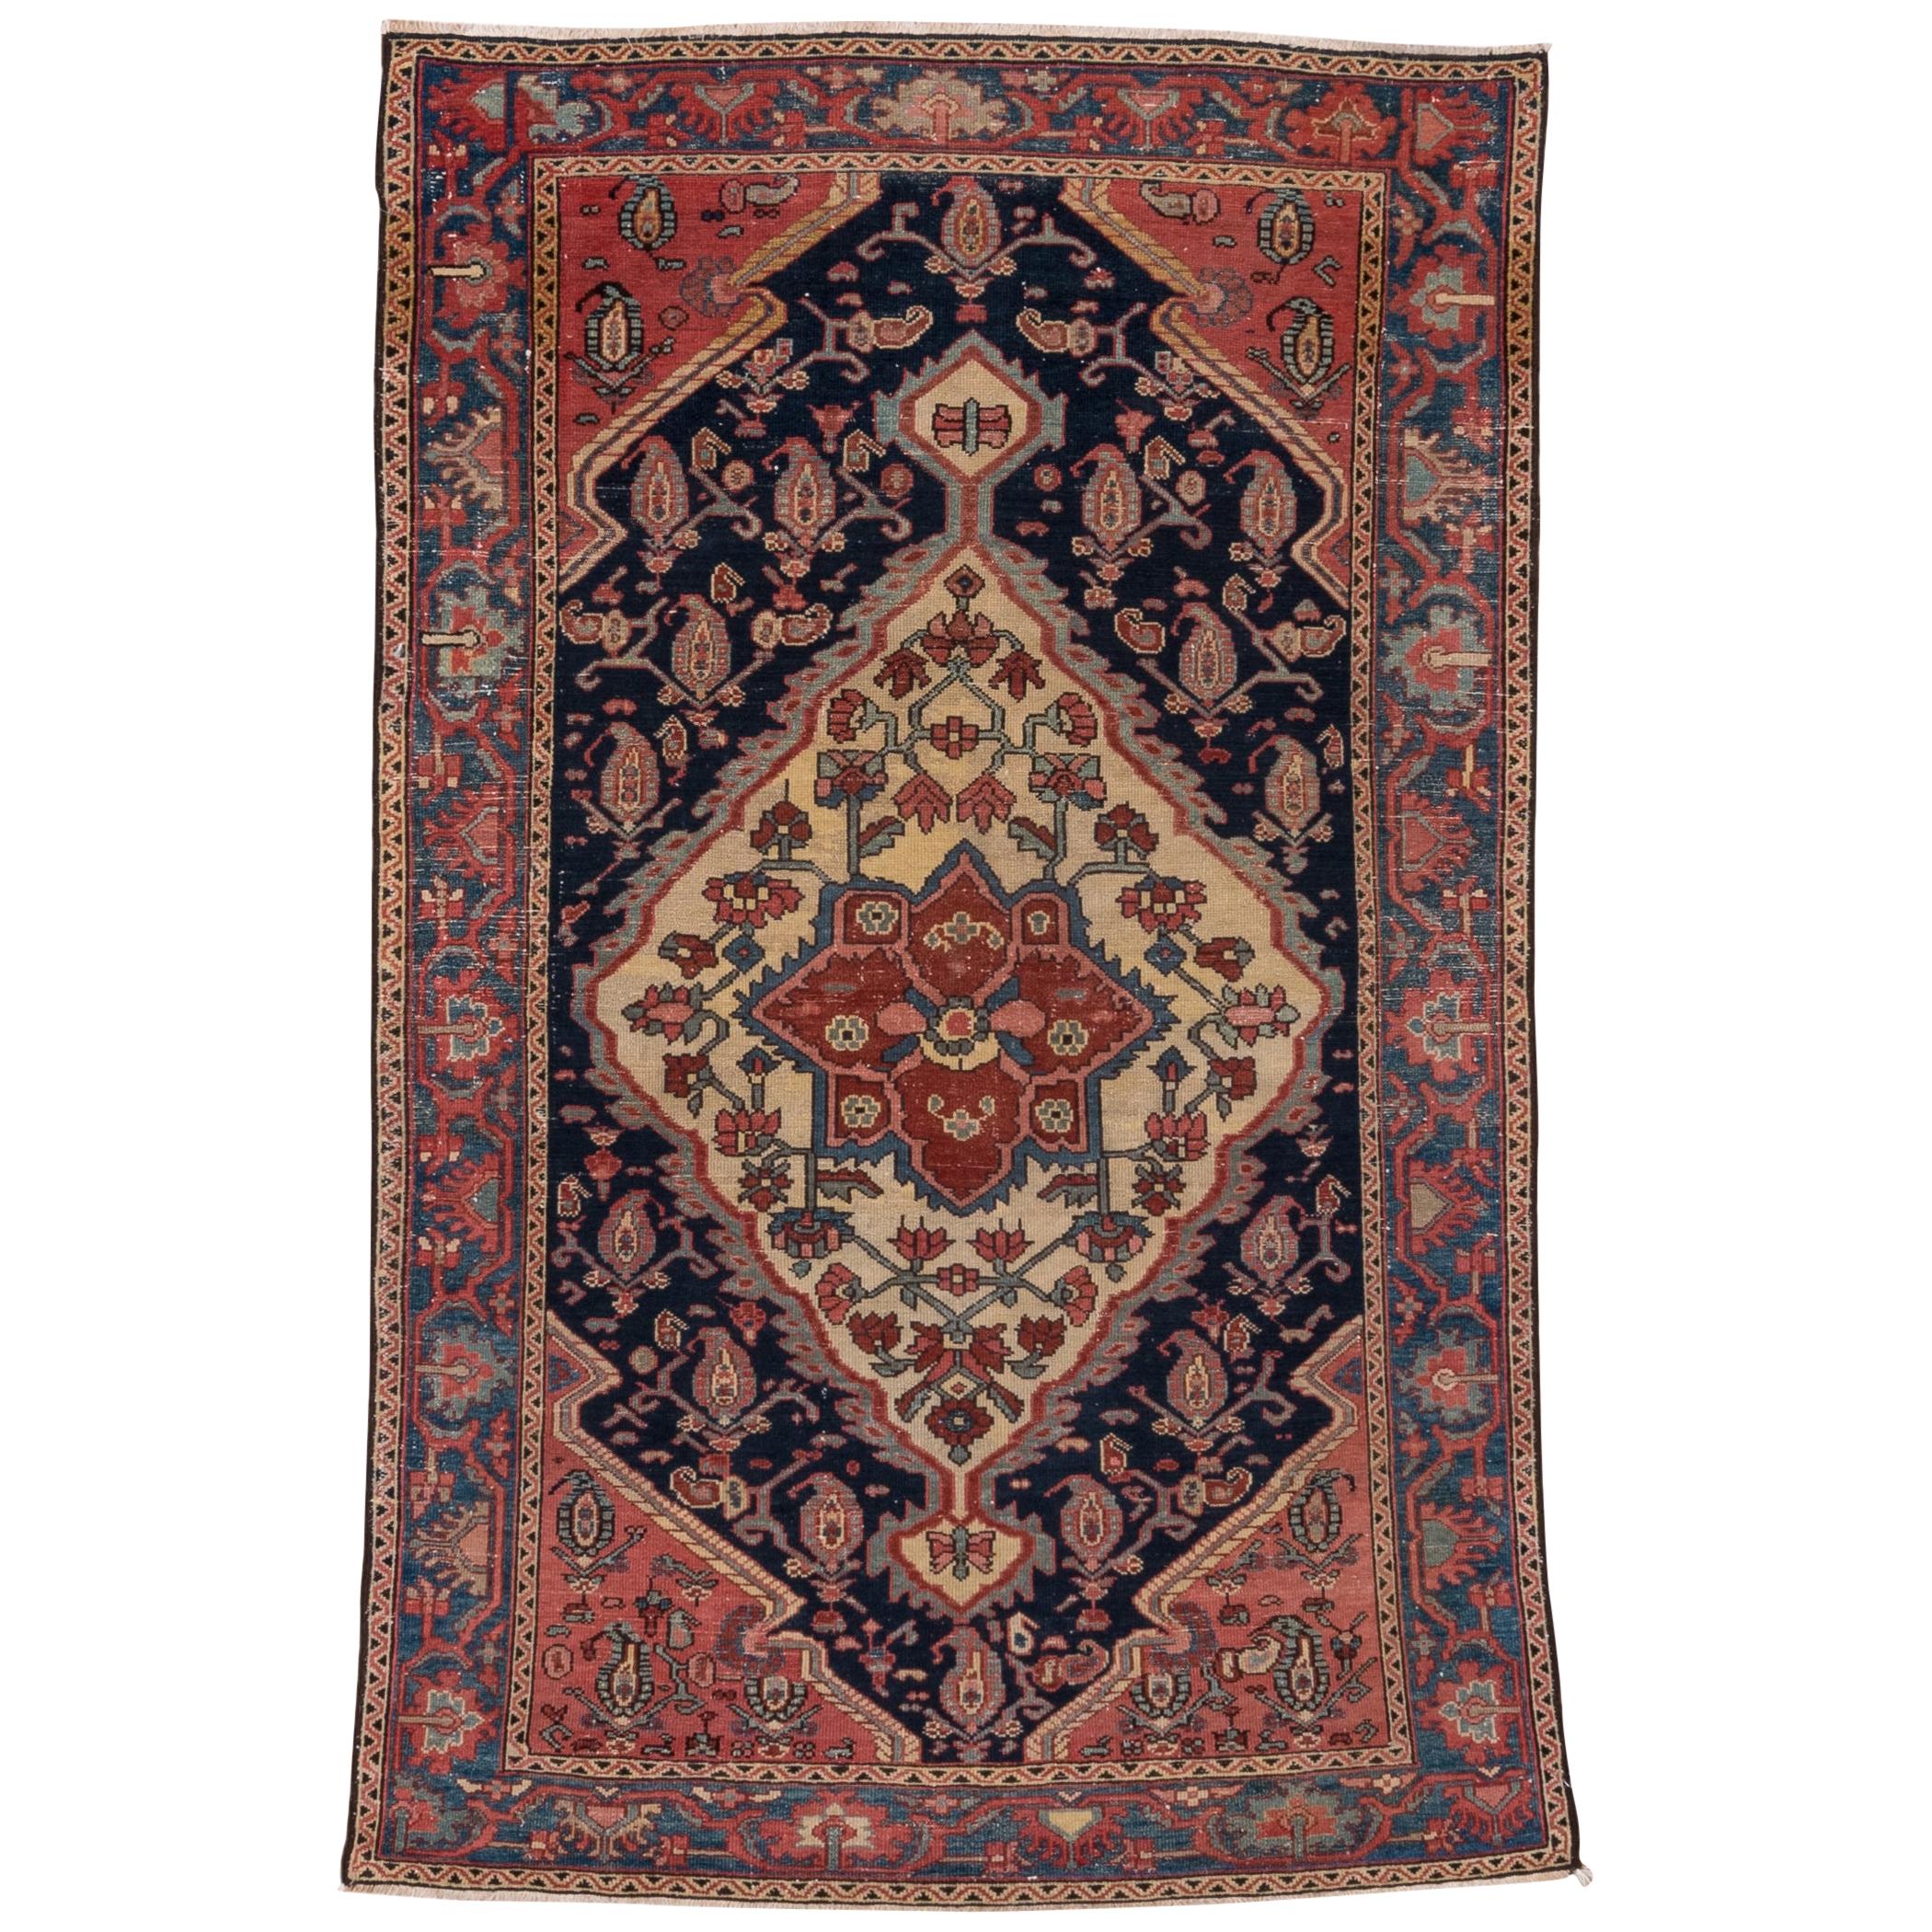 1900s Antique Persian Mishan Malayer Rug, Rose, Navy & Ivory Field, Blue Borders For Sale